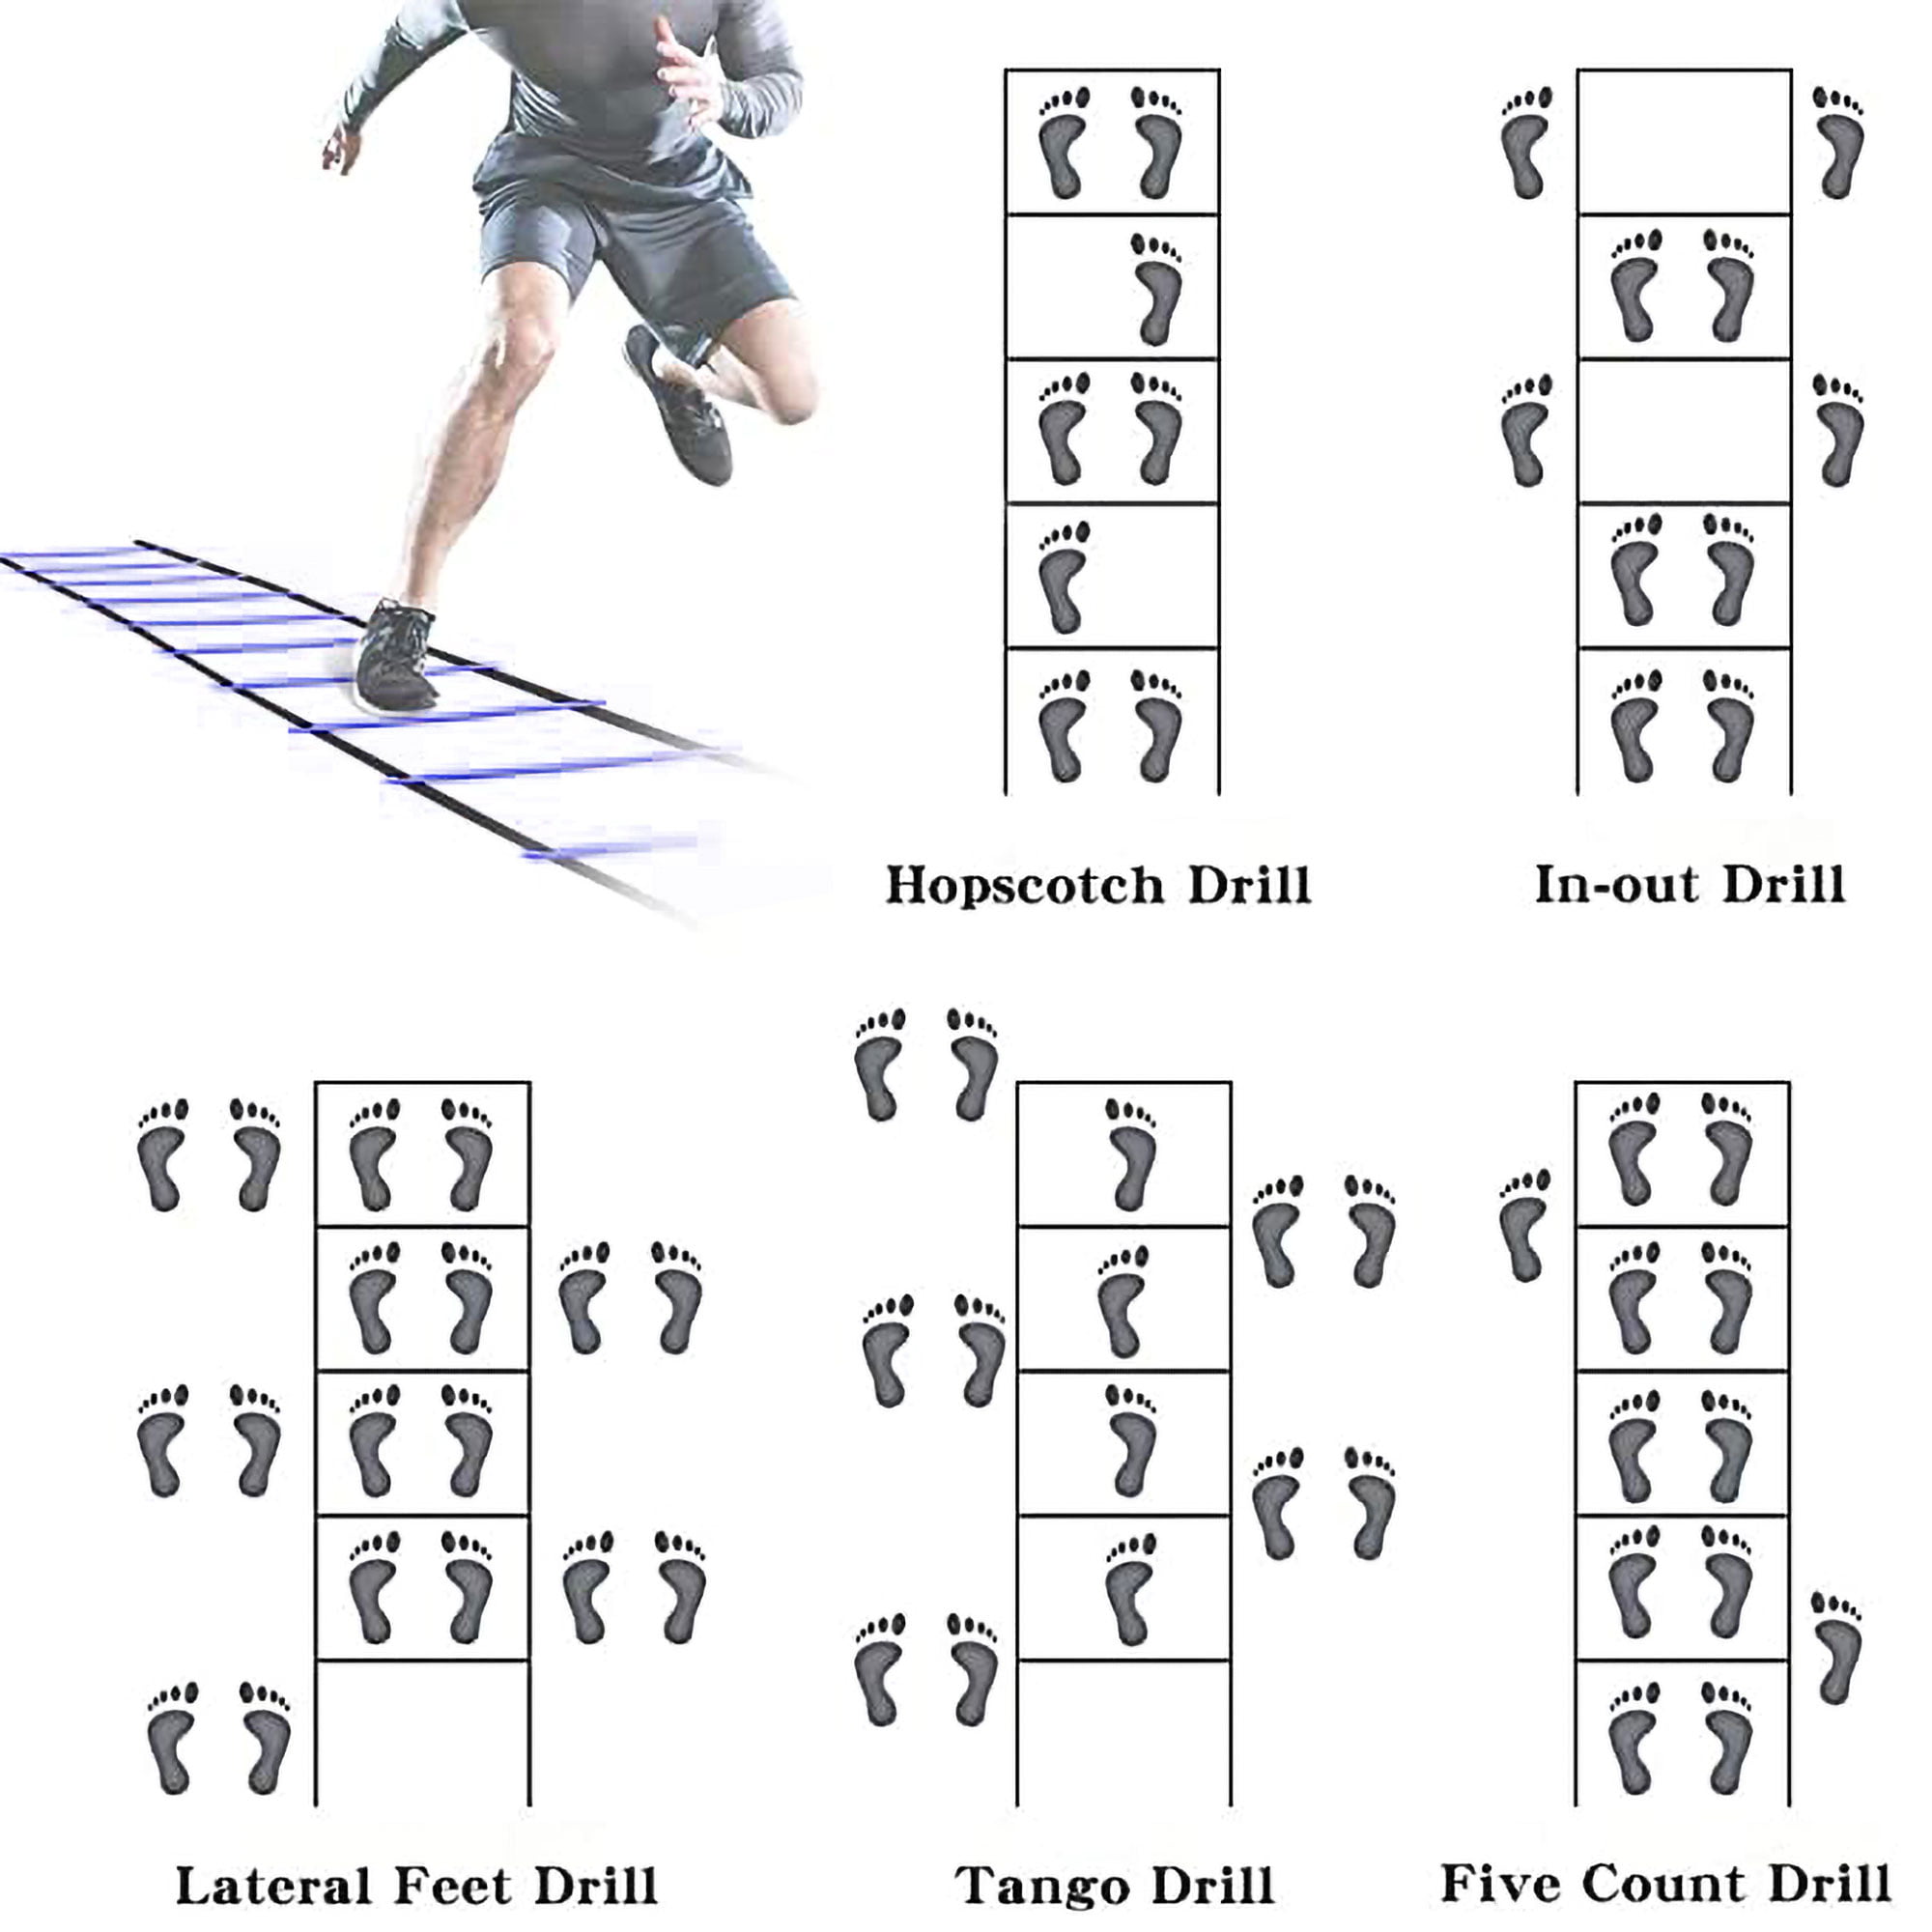 Details about   Agility Speed Training Ladder Footwork Fitness Football Exercise 13/16 Rung US 